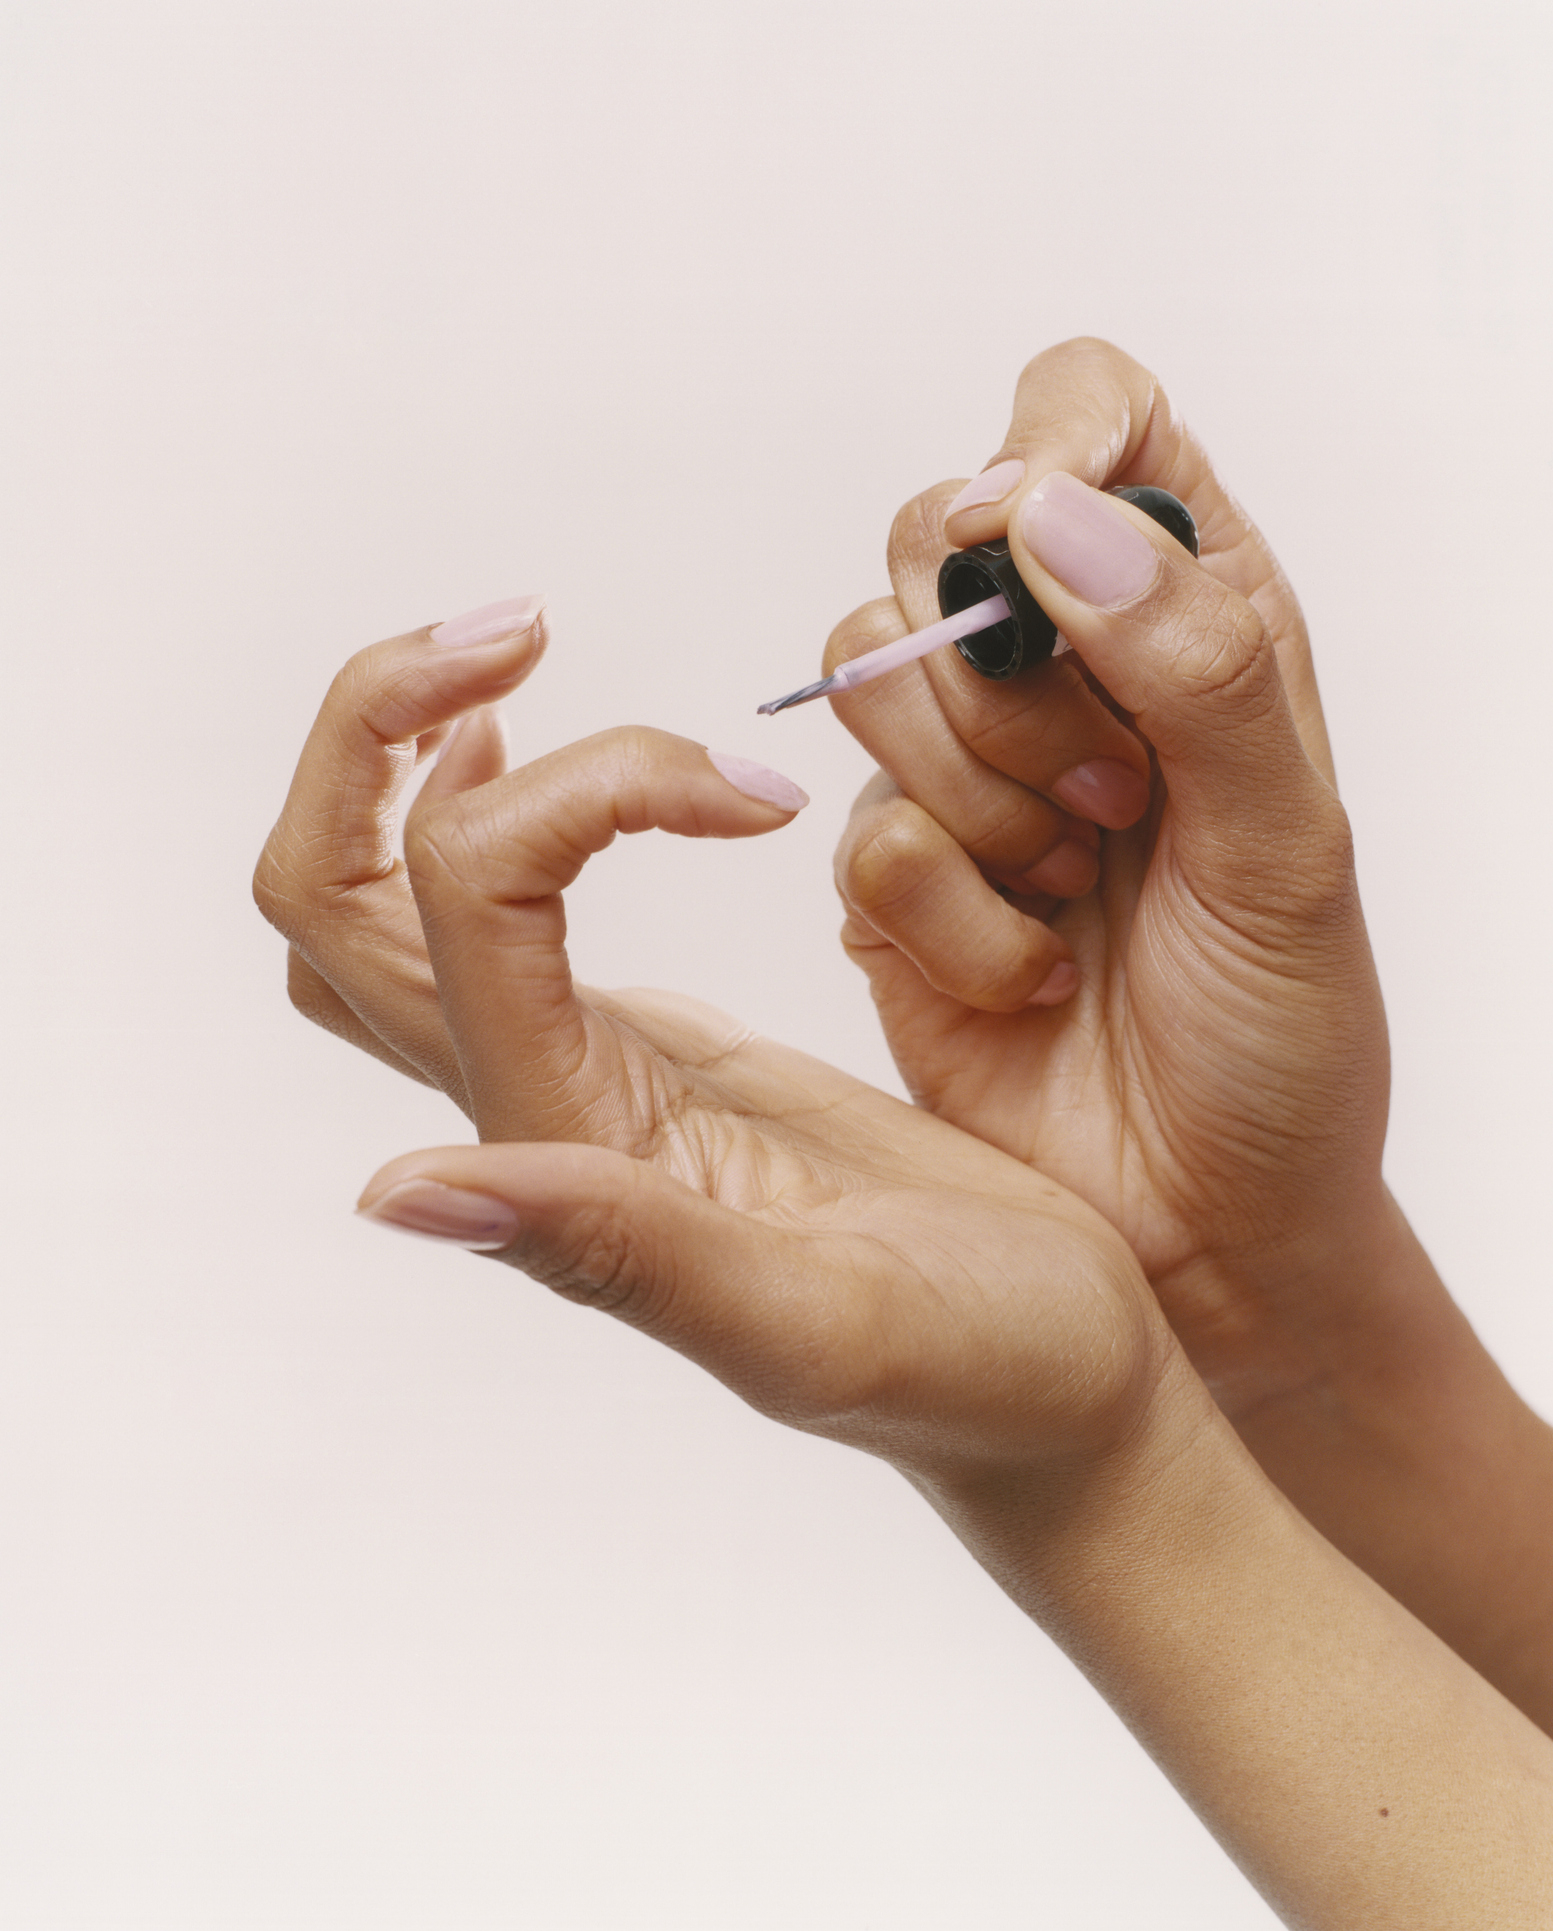 A person applying nail polish to fingernails, possibly in preparation for a wedding ceremony